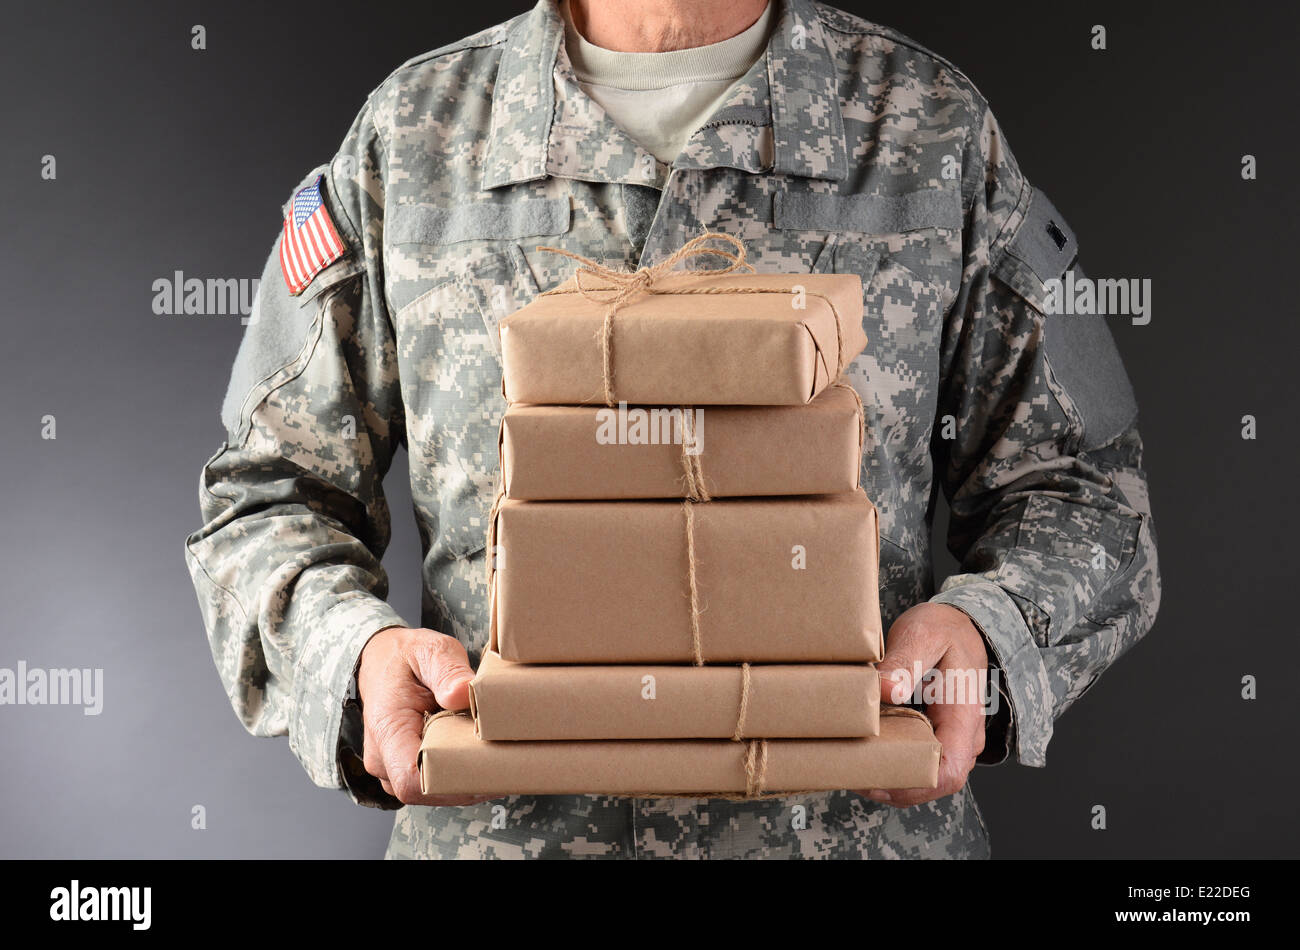 Closeup of a soldier wearing camouflage fatigues holding a stack of packages for mail call. Stock Photo